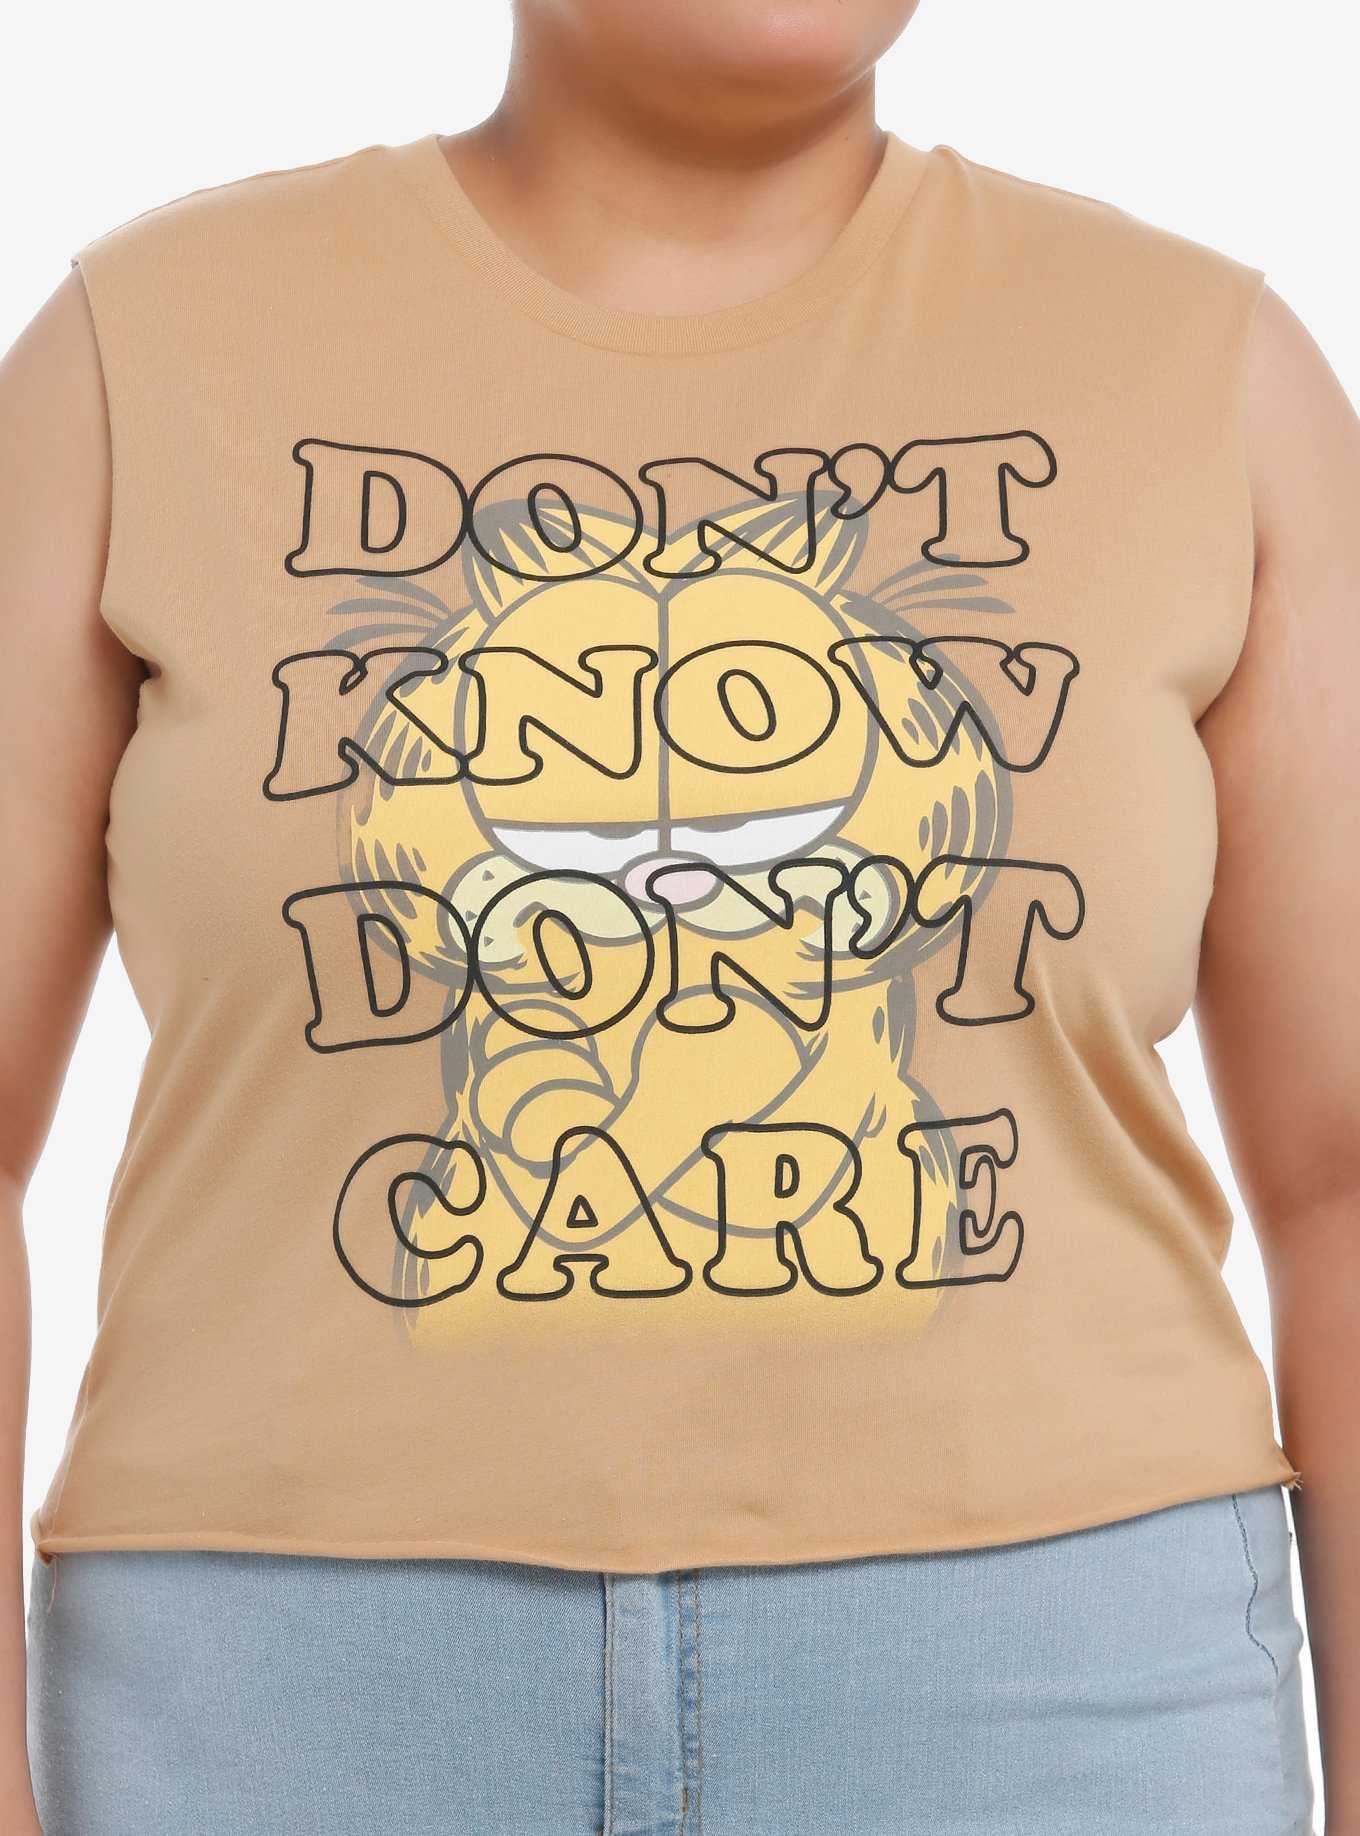 Garfield Don't Know Don't Care Girls Crop Muscle Tank Top Plus Size, , hi-res